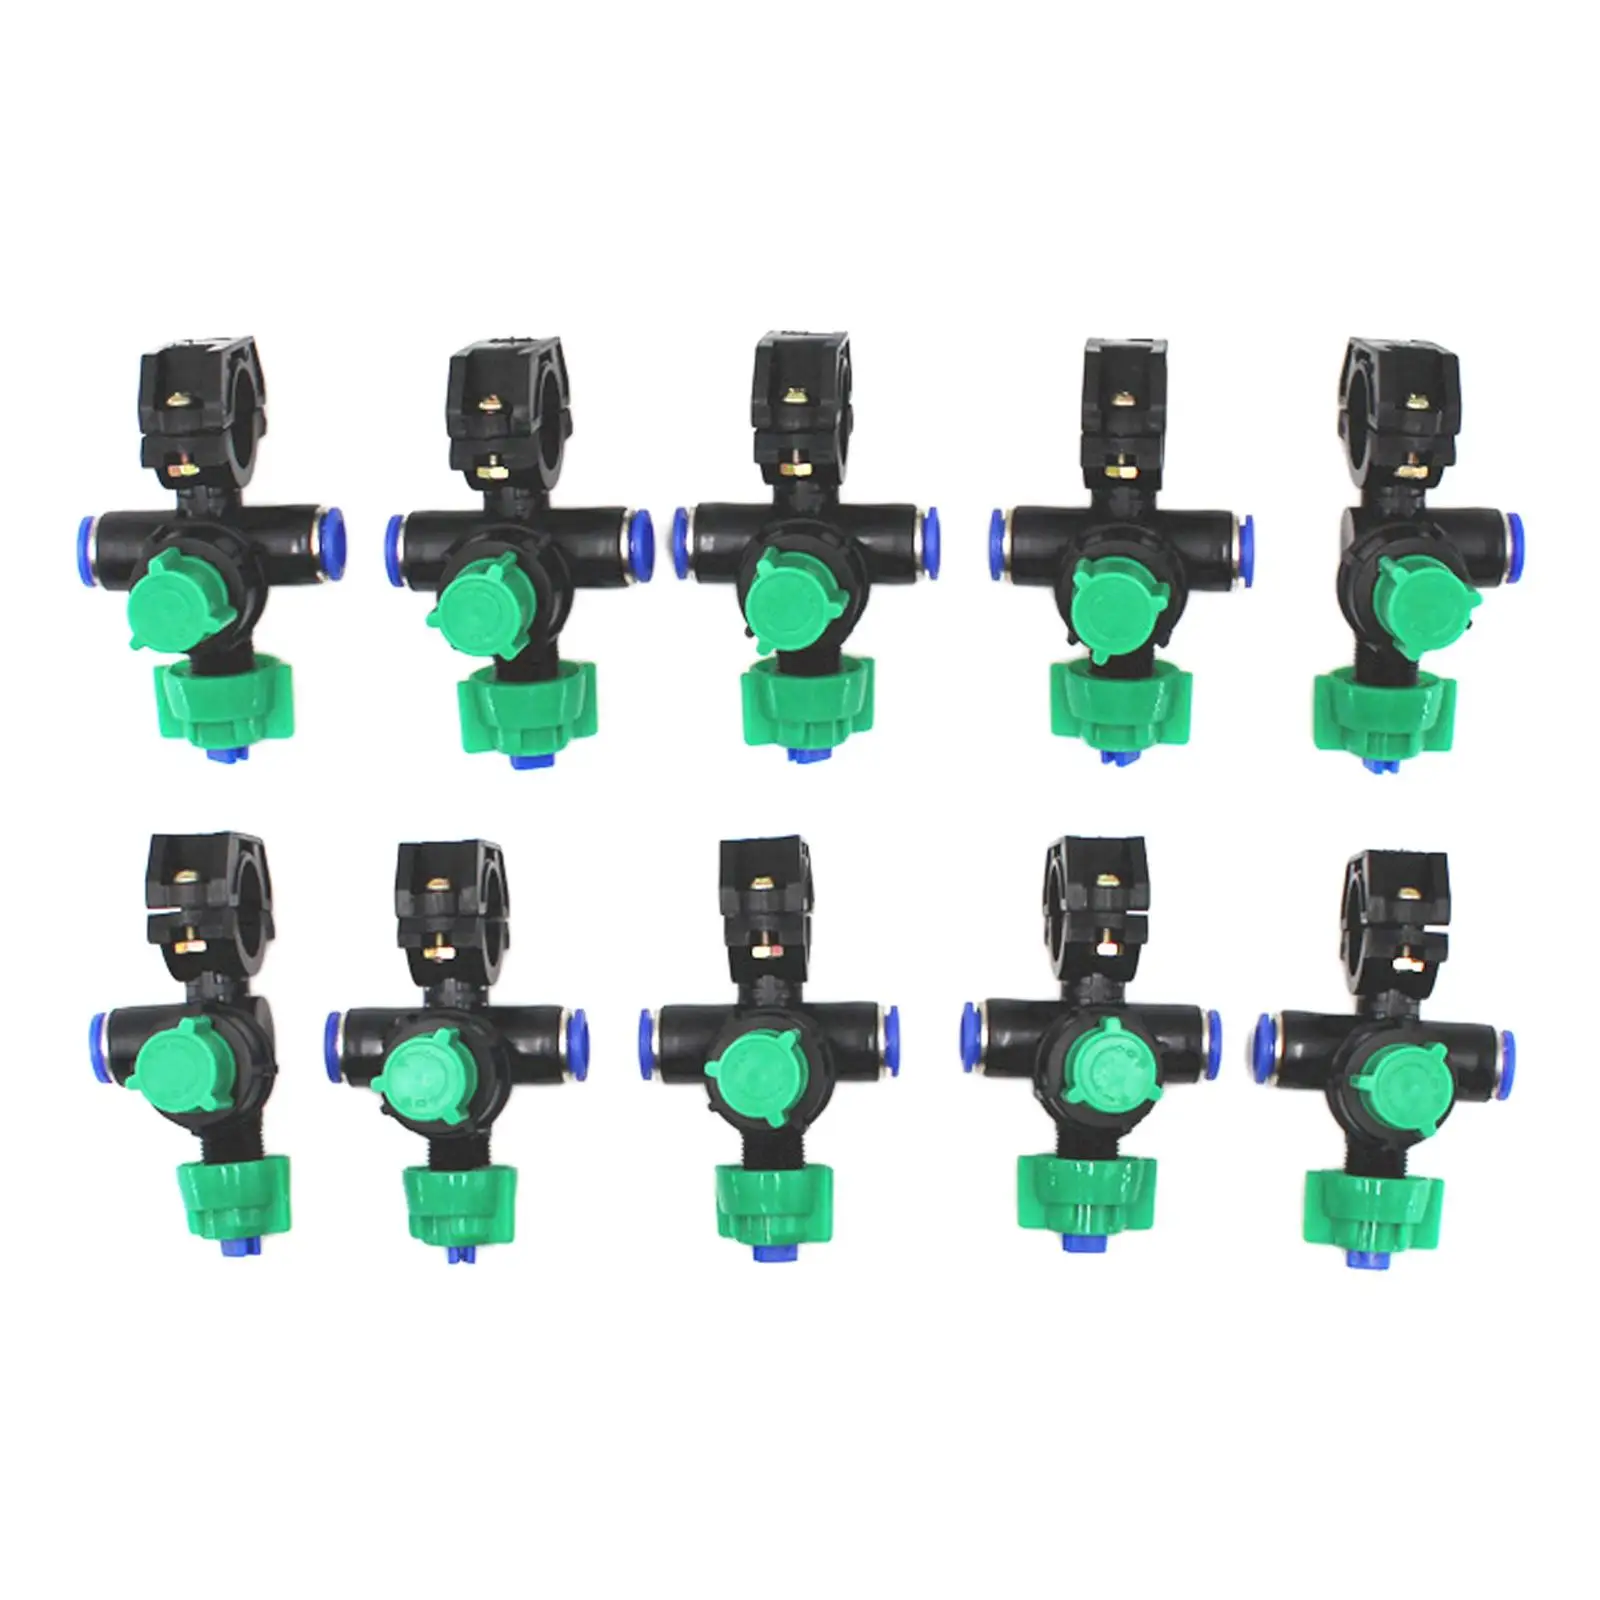 10pcs Agricultural Spray Head Misting System Head for Horticulture, Greenhouse Watering Nozzle Flower Irrigation Fog Sprayer